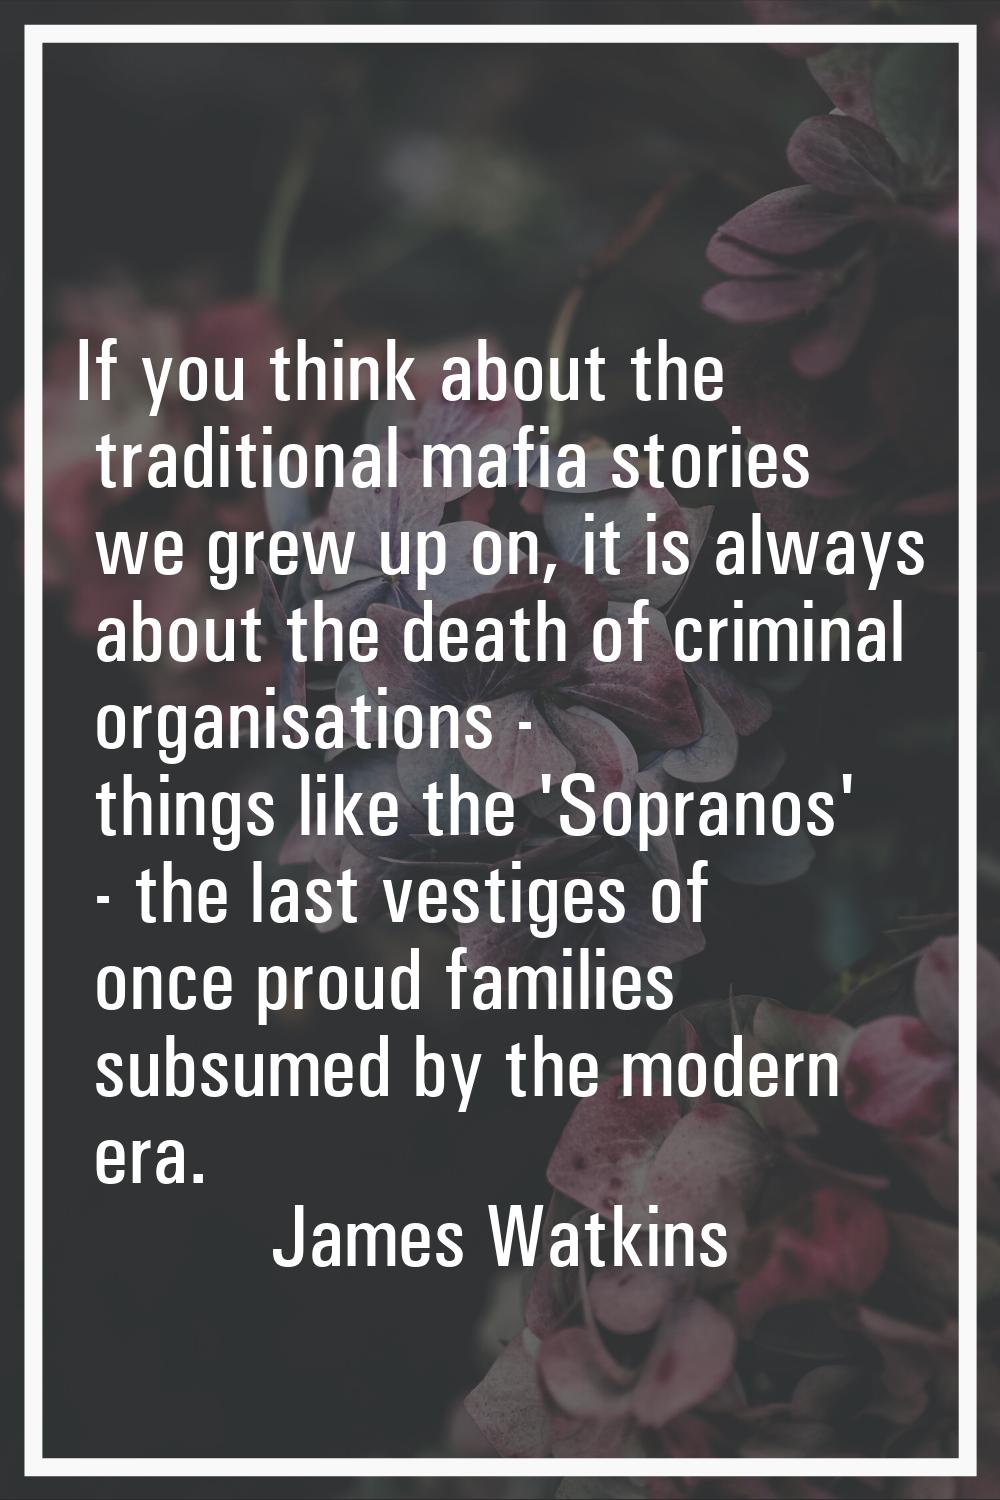 If you think about the traditional mafia stories we grew up on, it is always about the death of cri